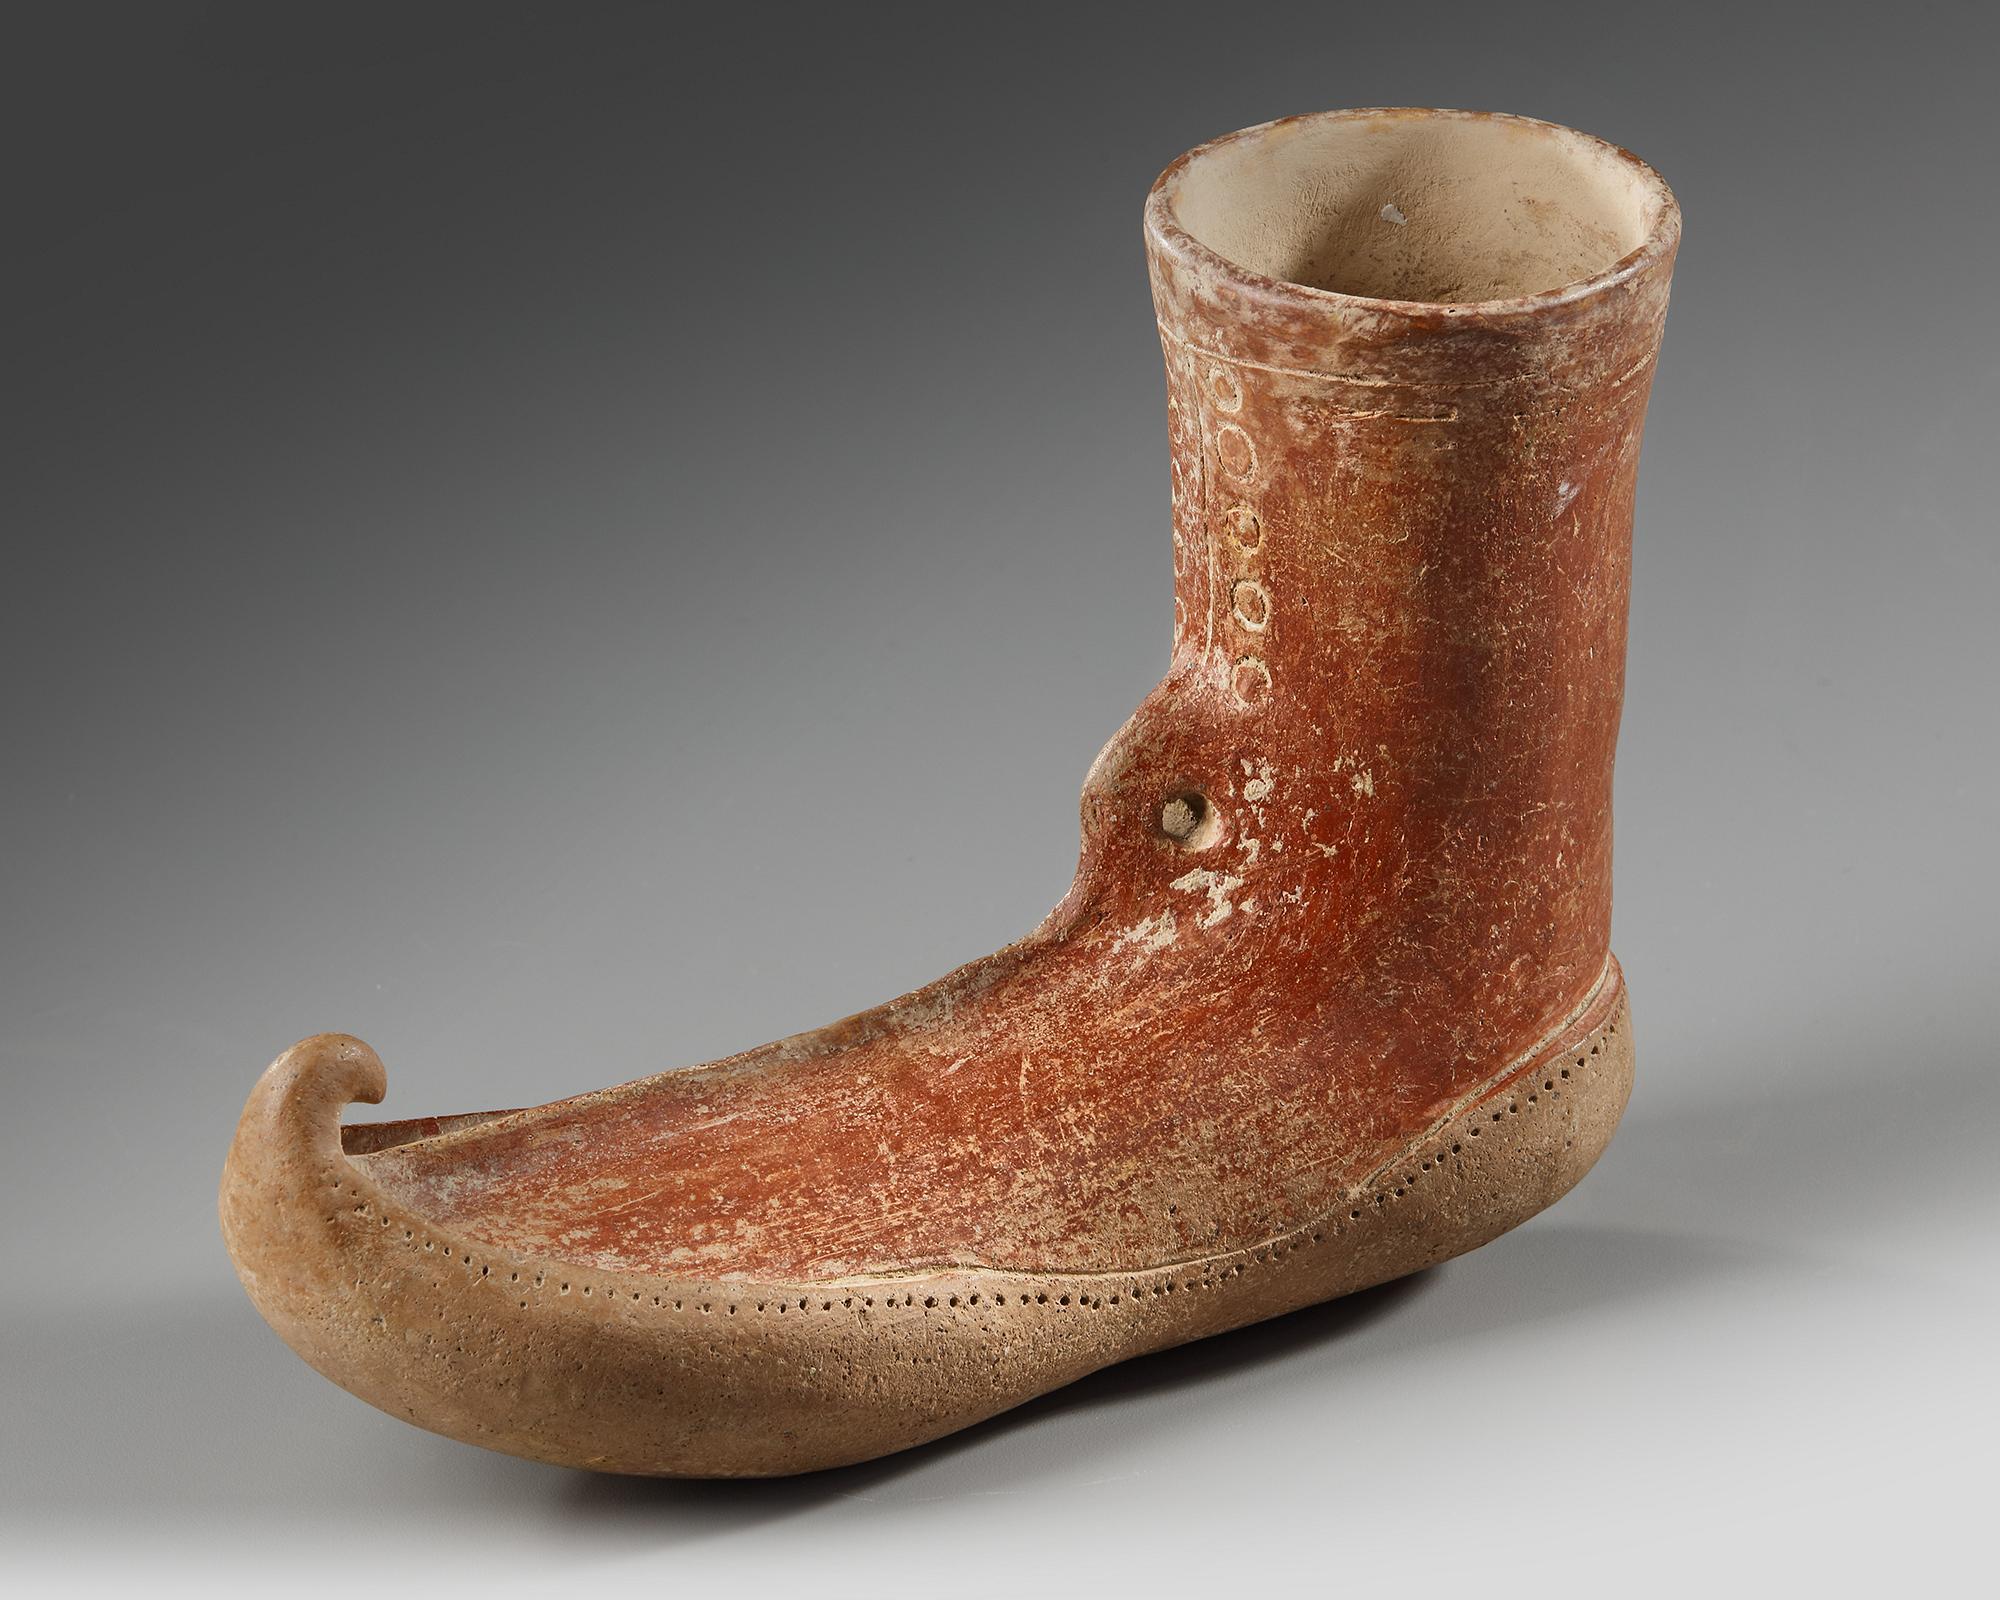 AN AMLASH RHYTON POTTERY IN FORM OF SHOES, CIRCA 1ST MILLENNIUM B.C. - Image 4 of 5